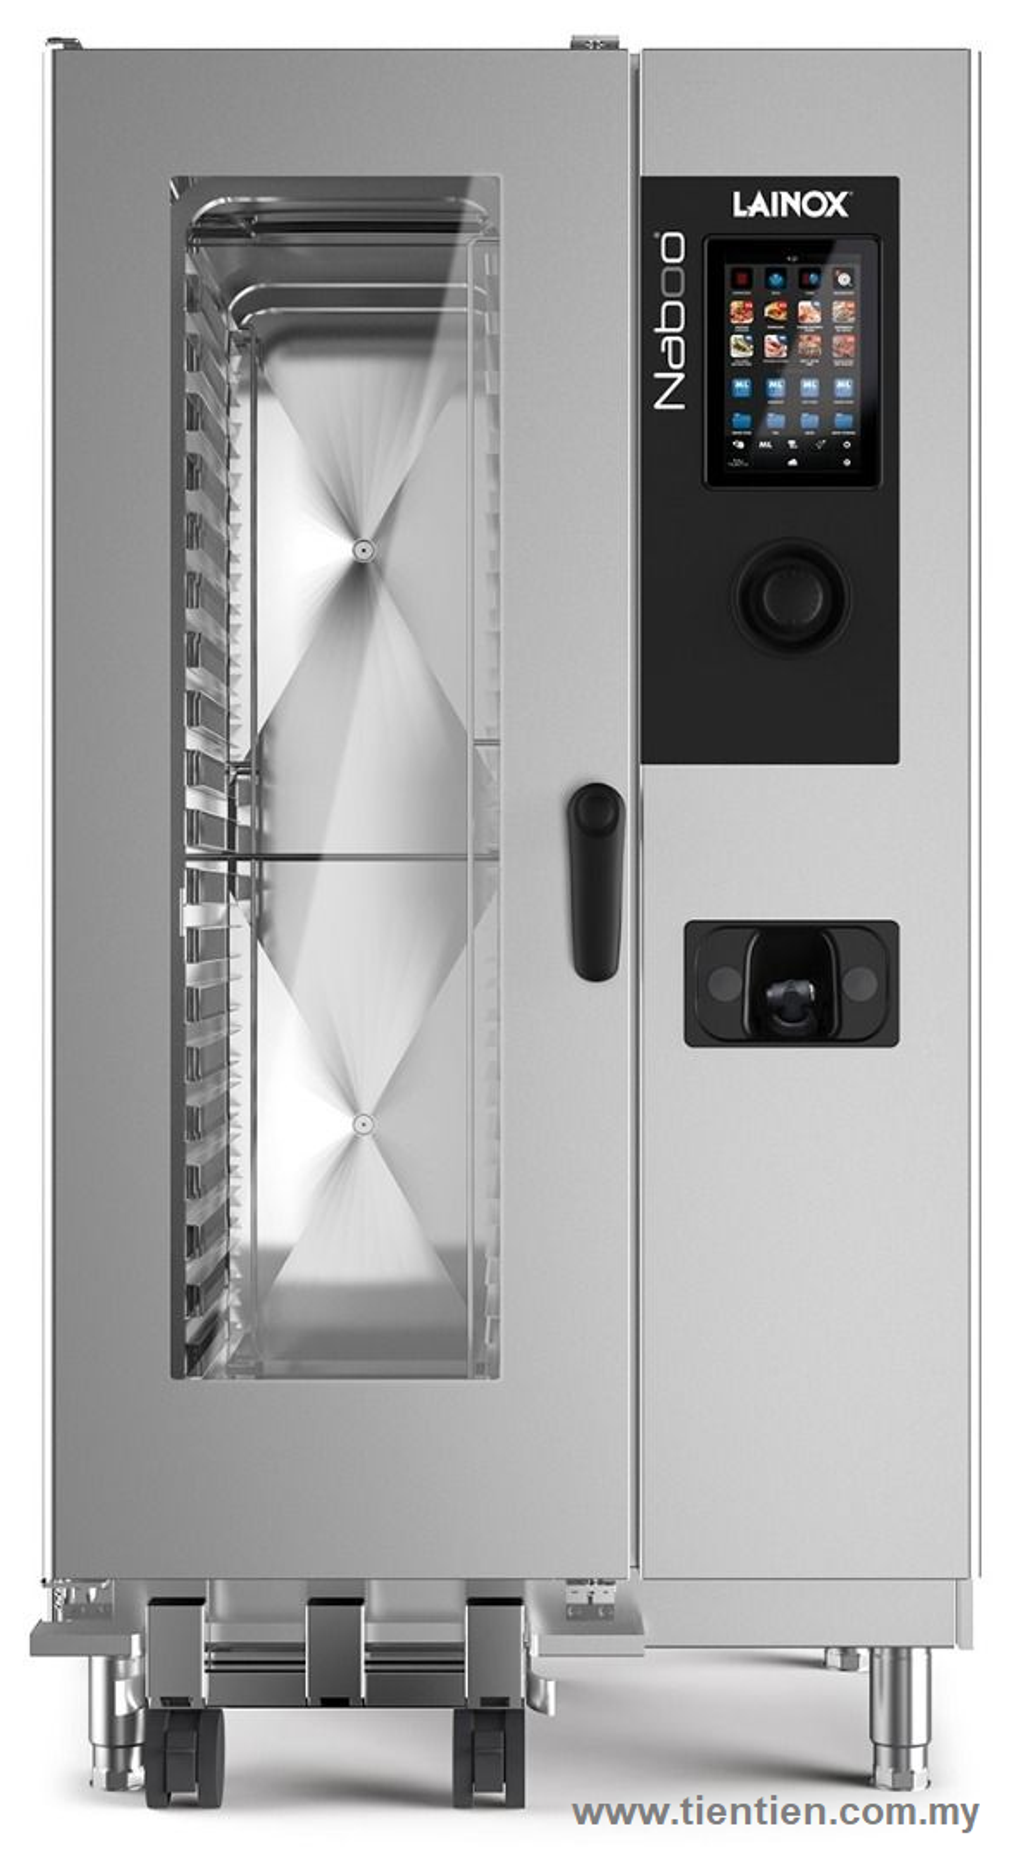 lainox-boiler-combi-oven-naeb201r-a-tientien-malaysia.png